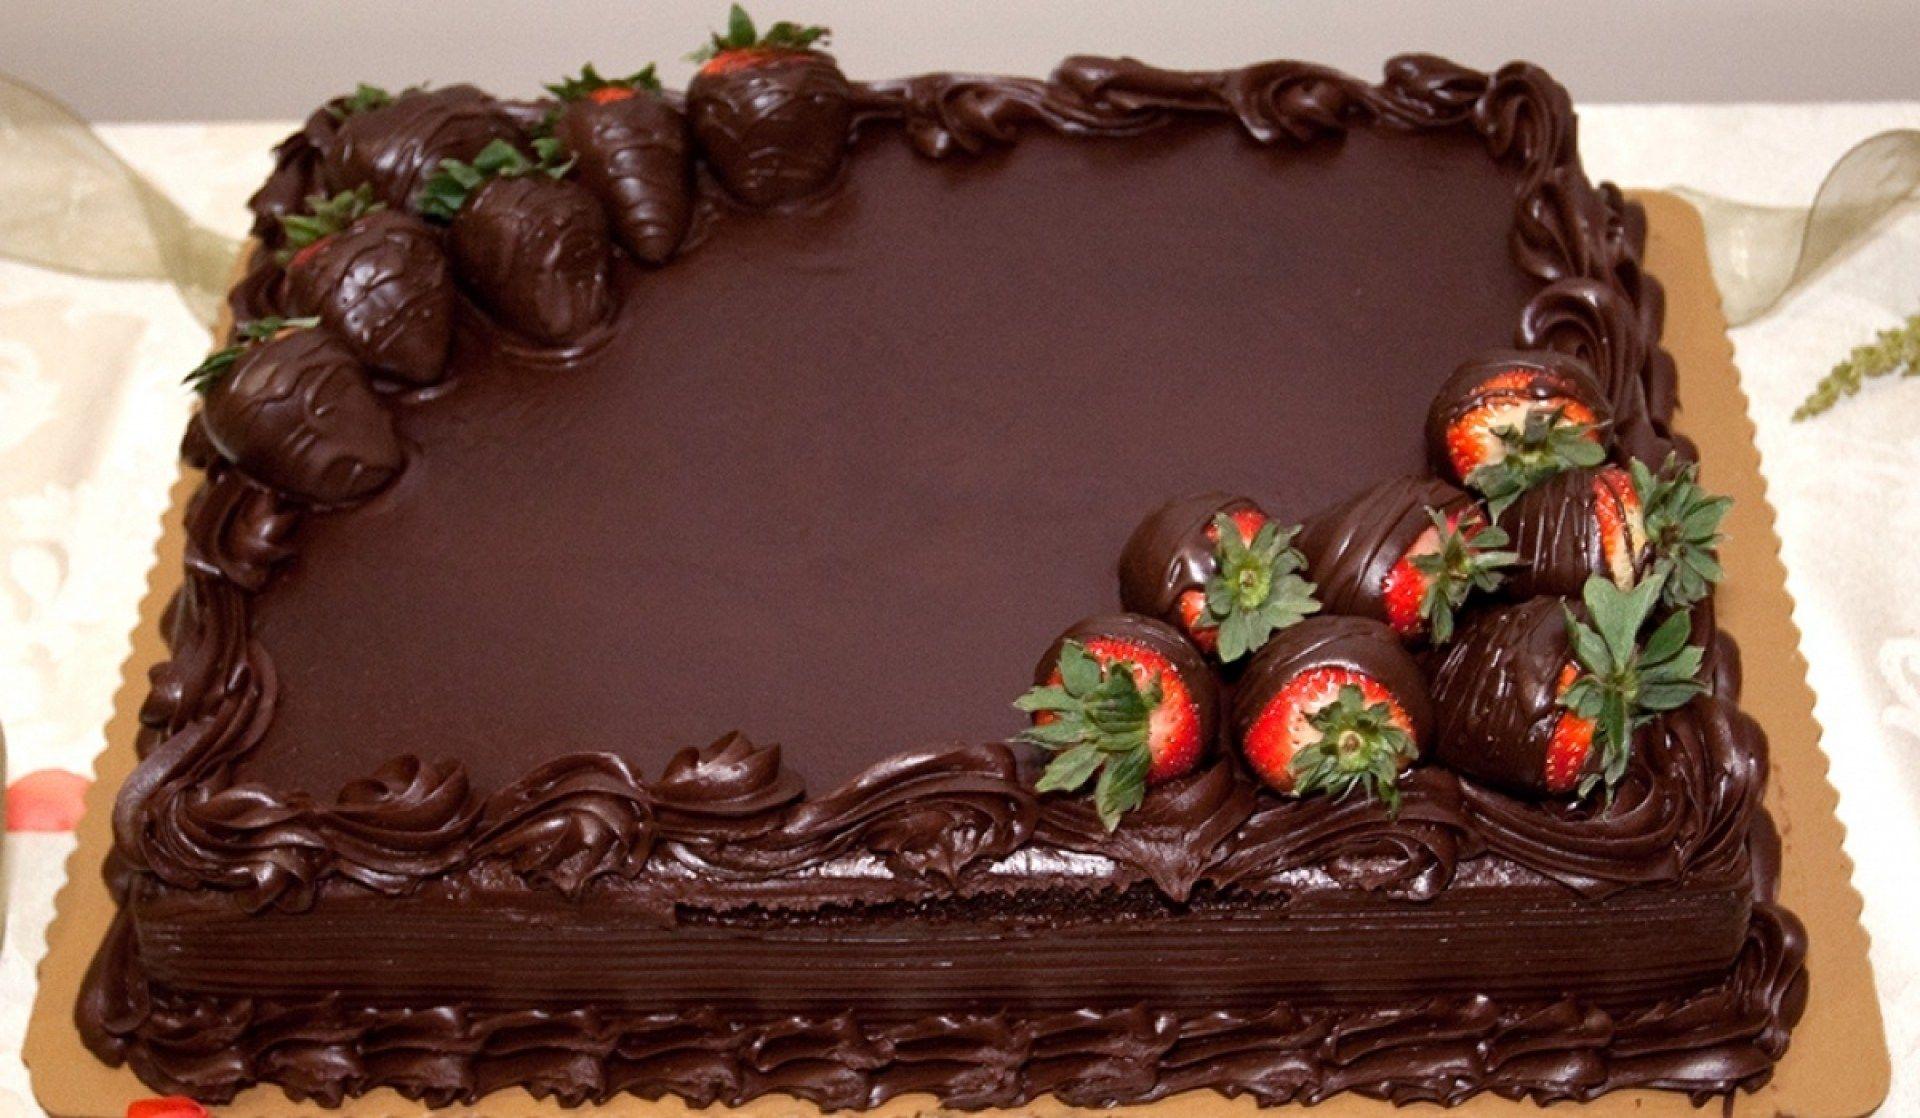 Chocolate Cake Photos, Download The BEST Free Chocolate Cake Stock Photos &  HD Images